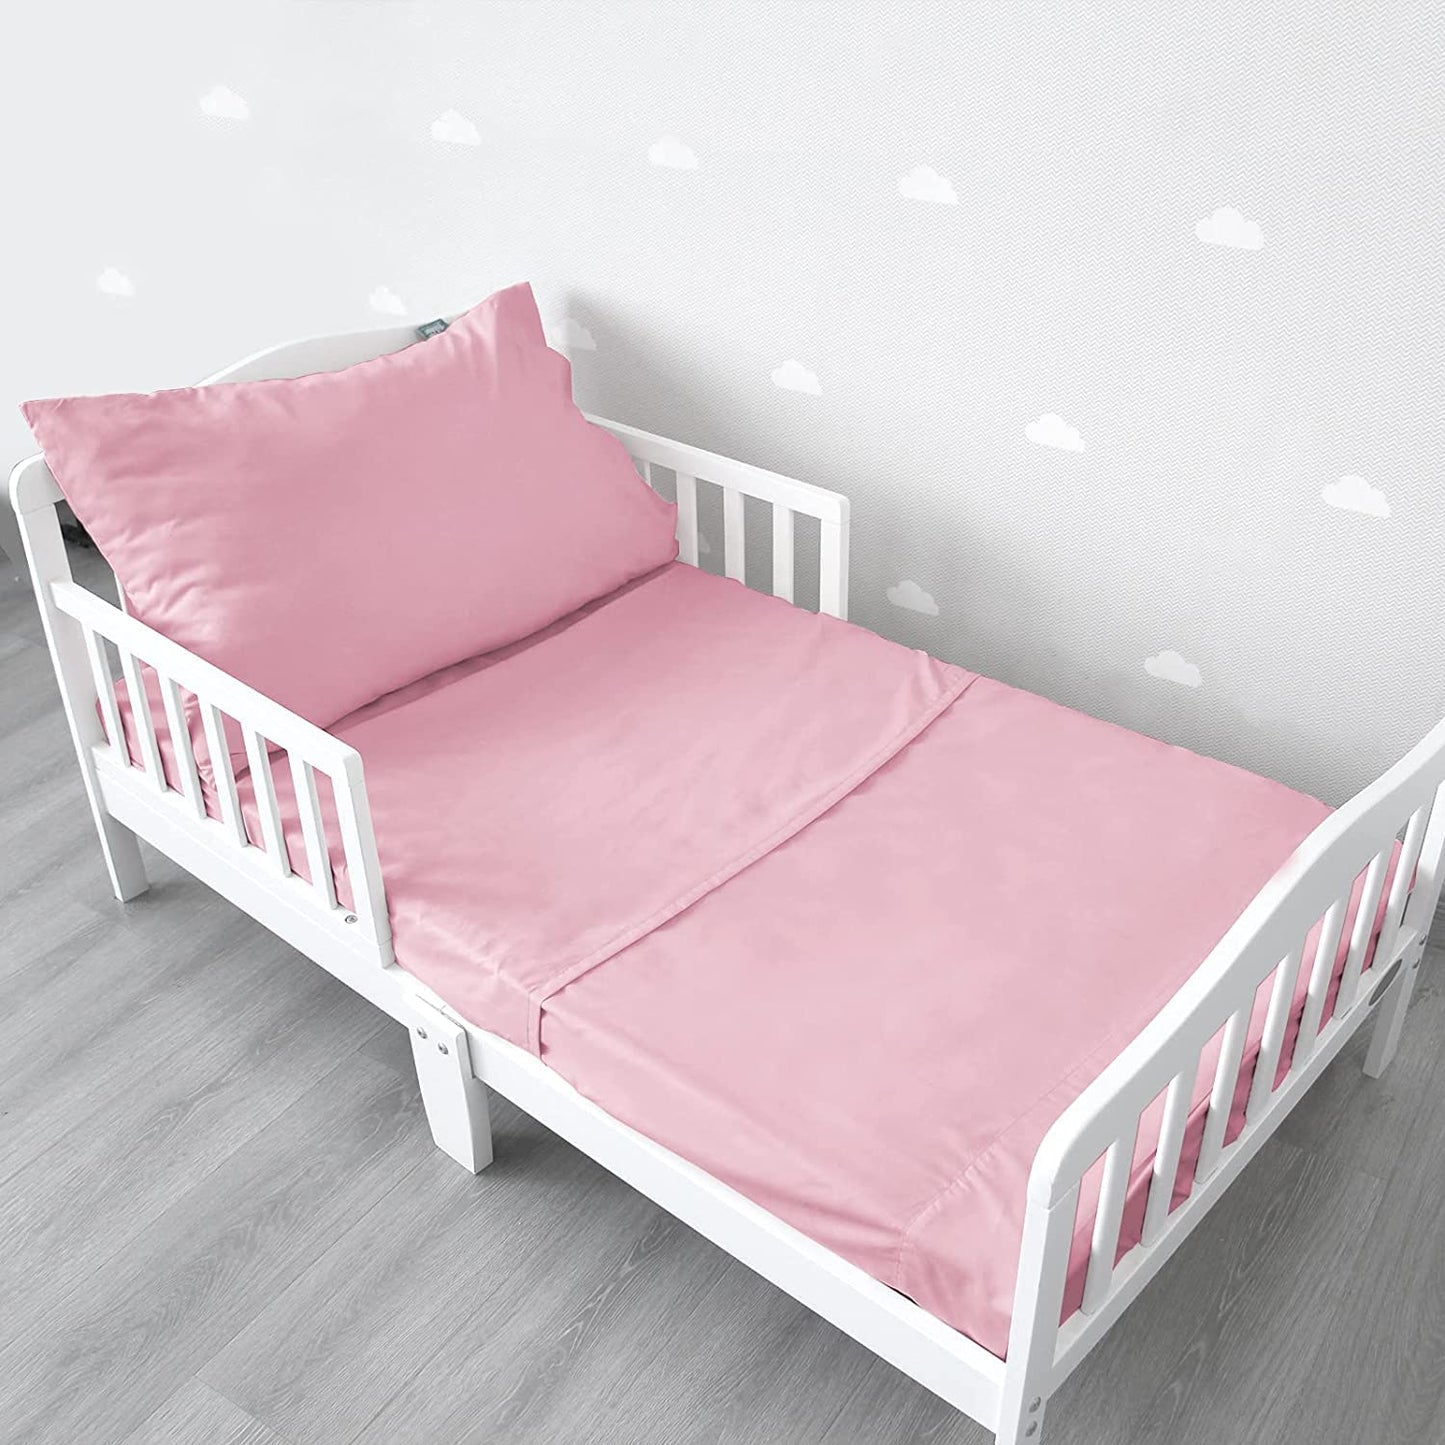 Toddler Bedding Set - 3 Pieces, Includes a Crib Fitted Sheet, Flat Sheet and Envelope Pillowcase, Soft and Breathable, Pink